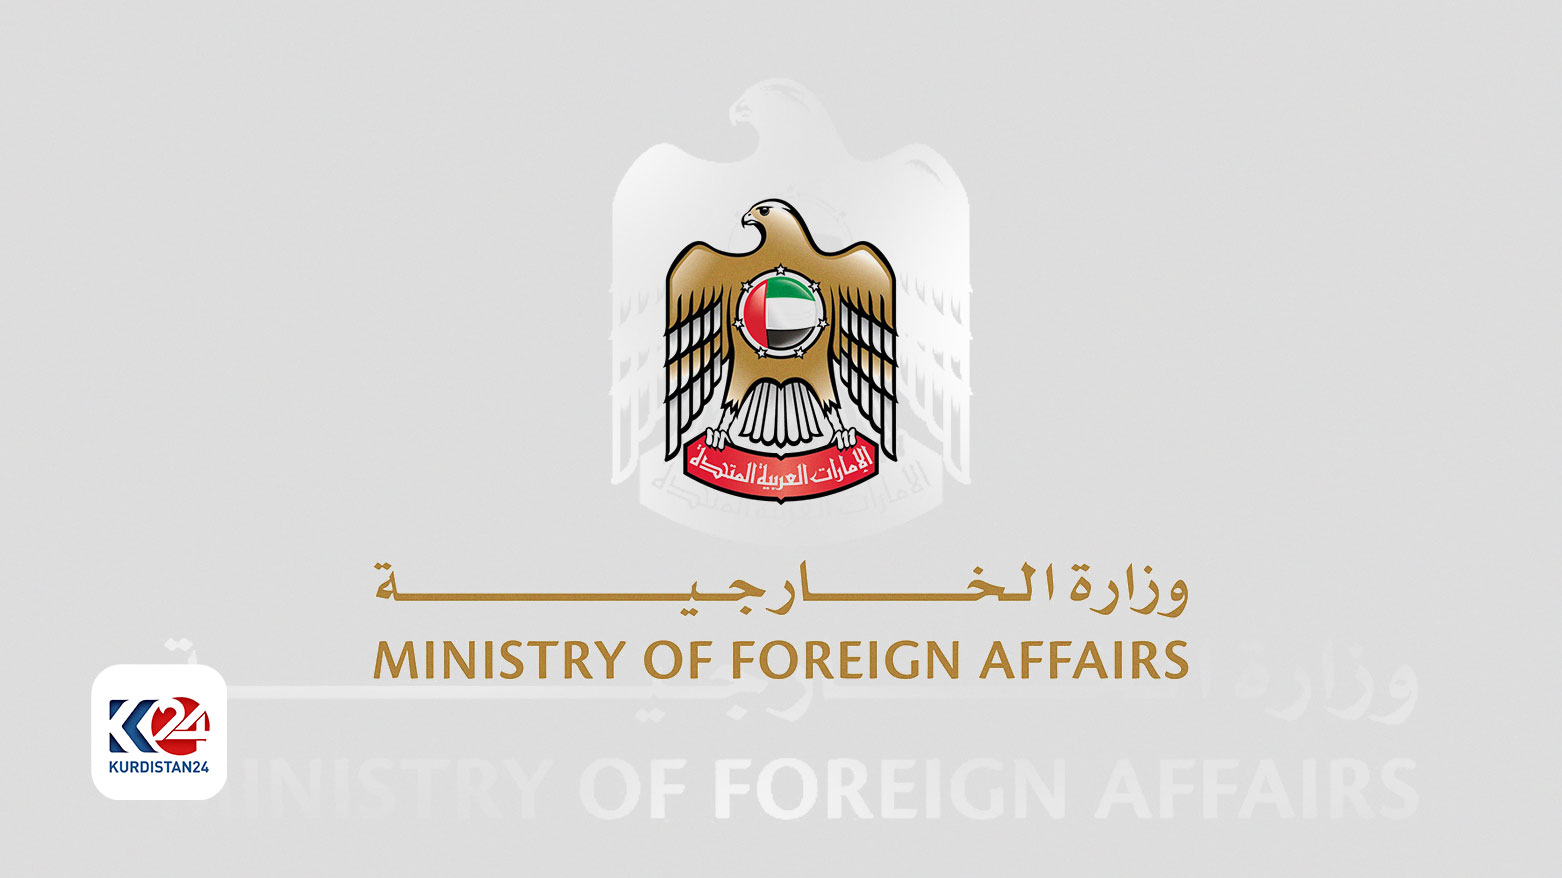 The logo of the Ministry of Foreign Affairs of the UAE. (Photo: Designed by Kurdistan24)